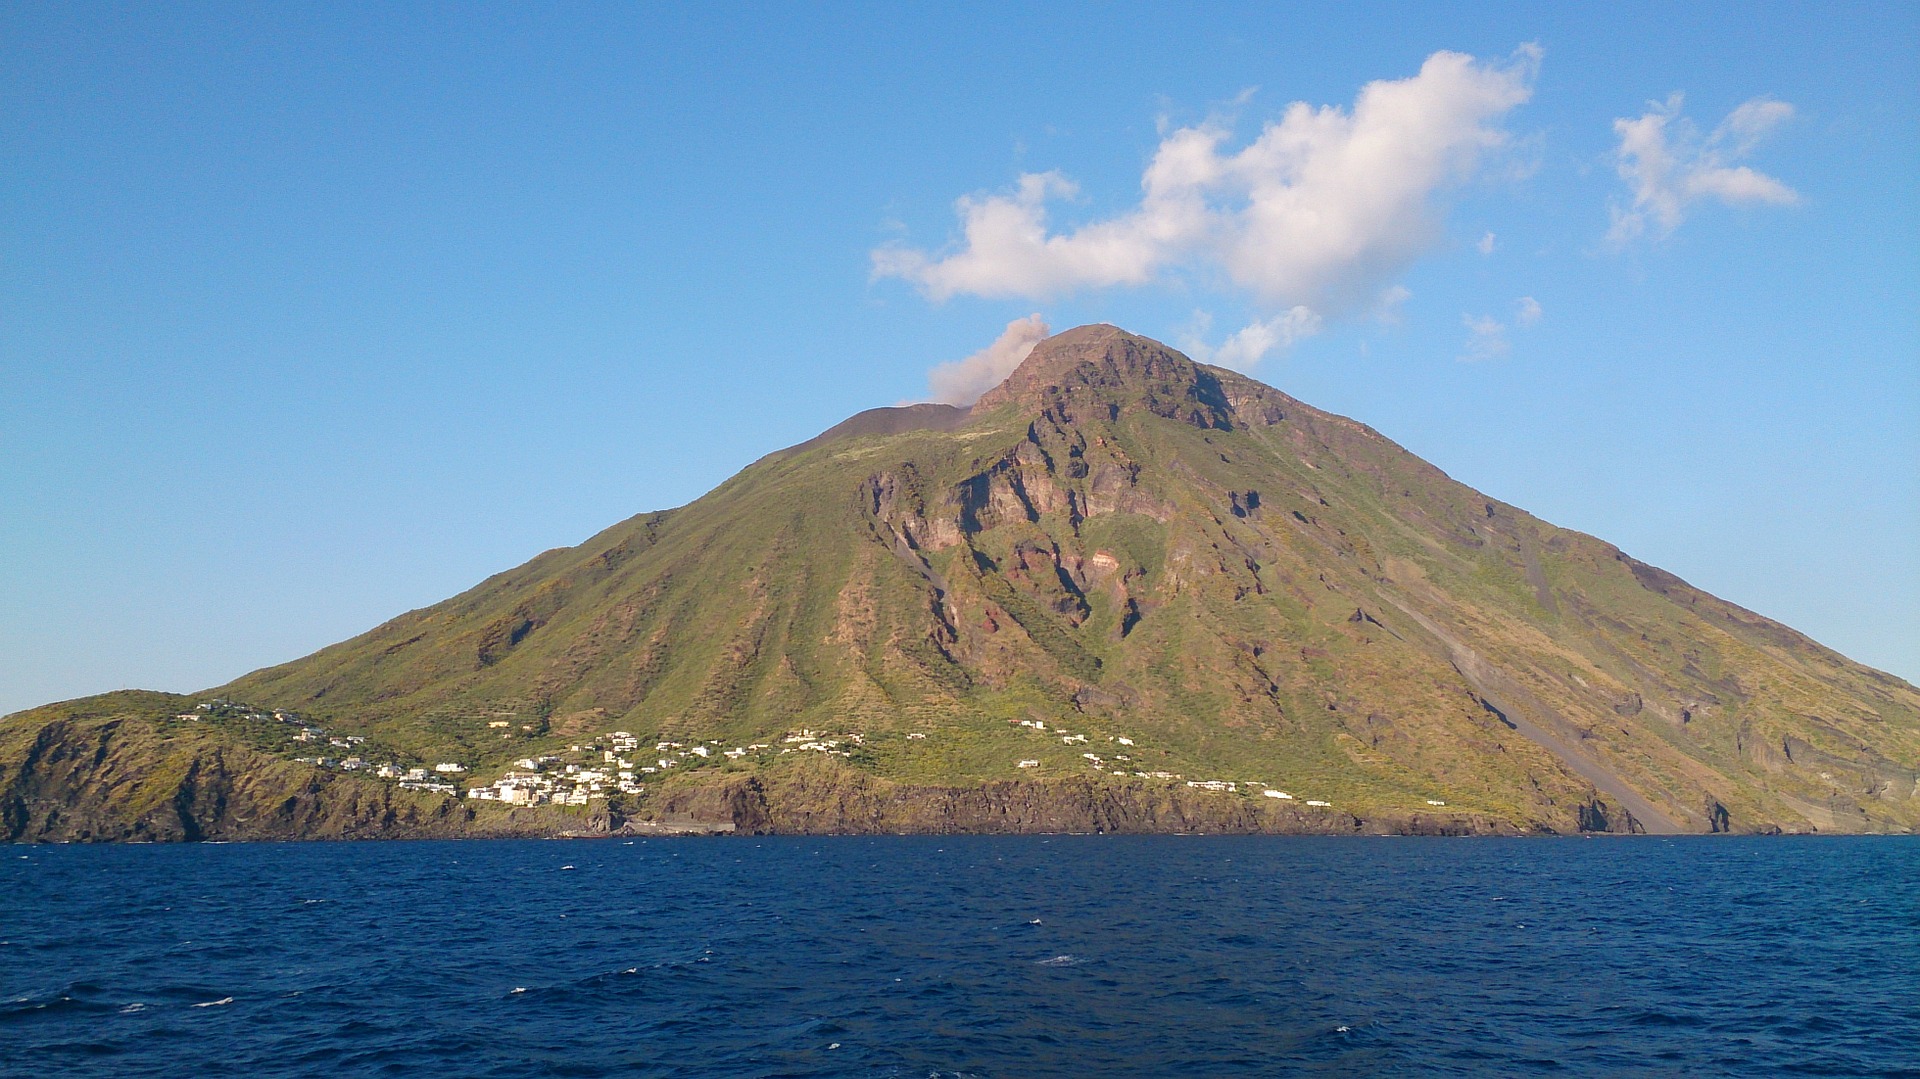 Sicily and the Aeolian Islands